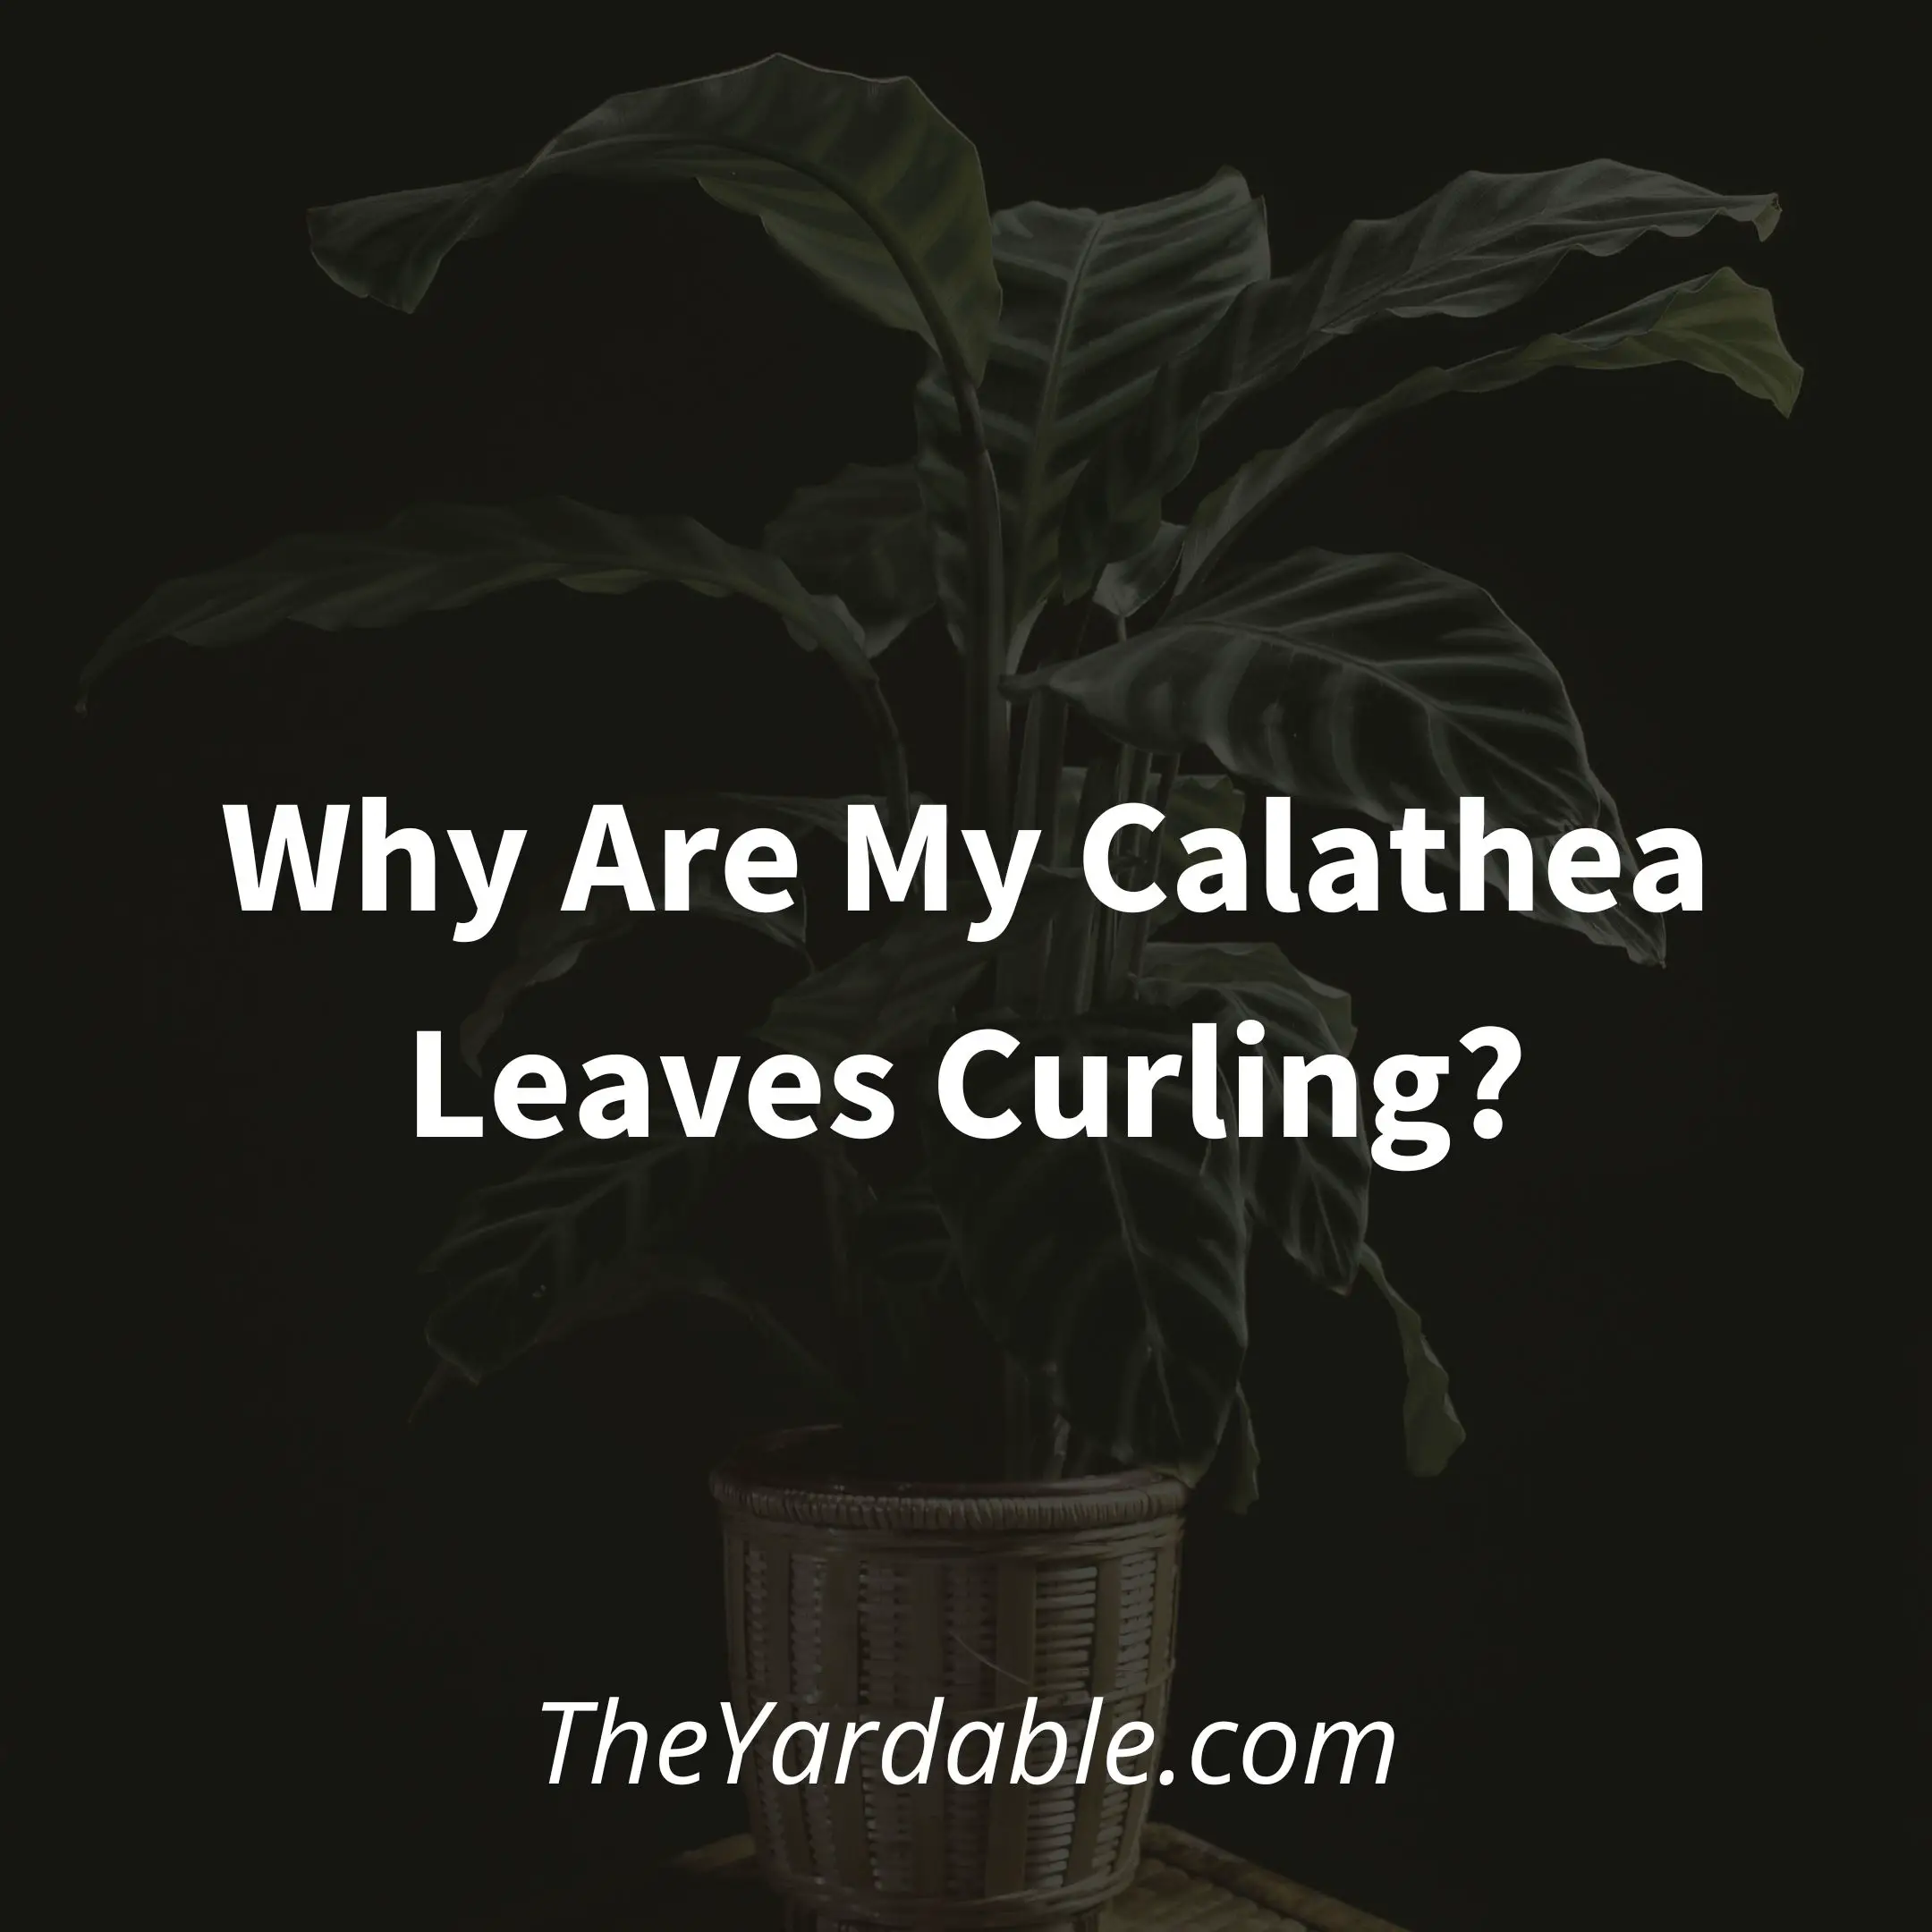 Why Are My Calathea Leaves Curling? – How To Fix & Prevent It